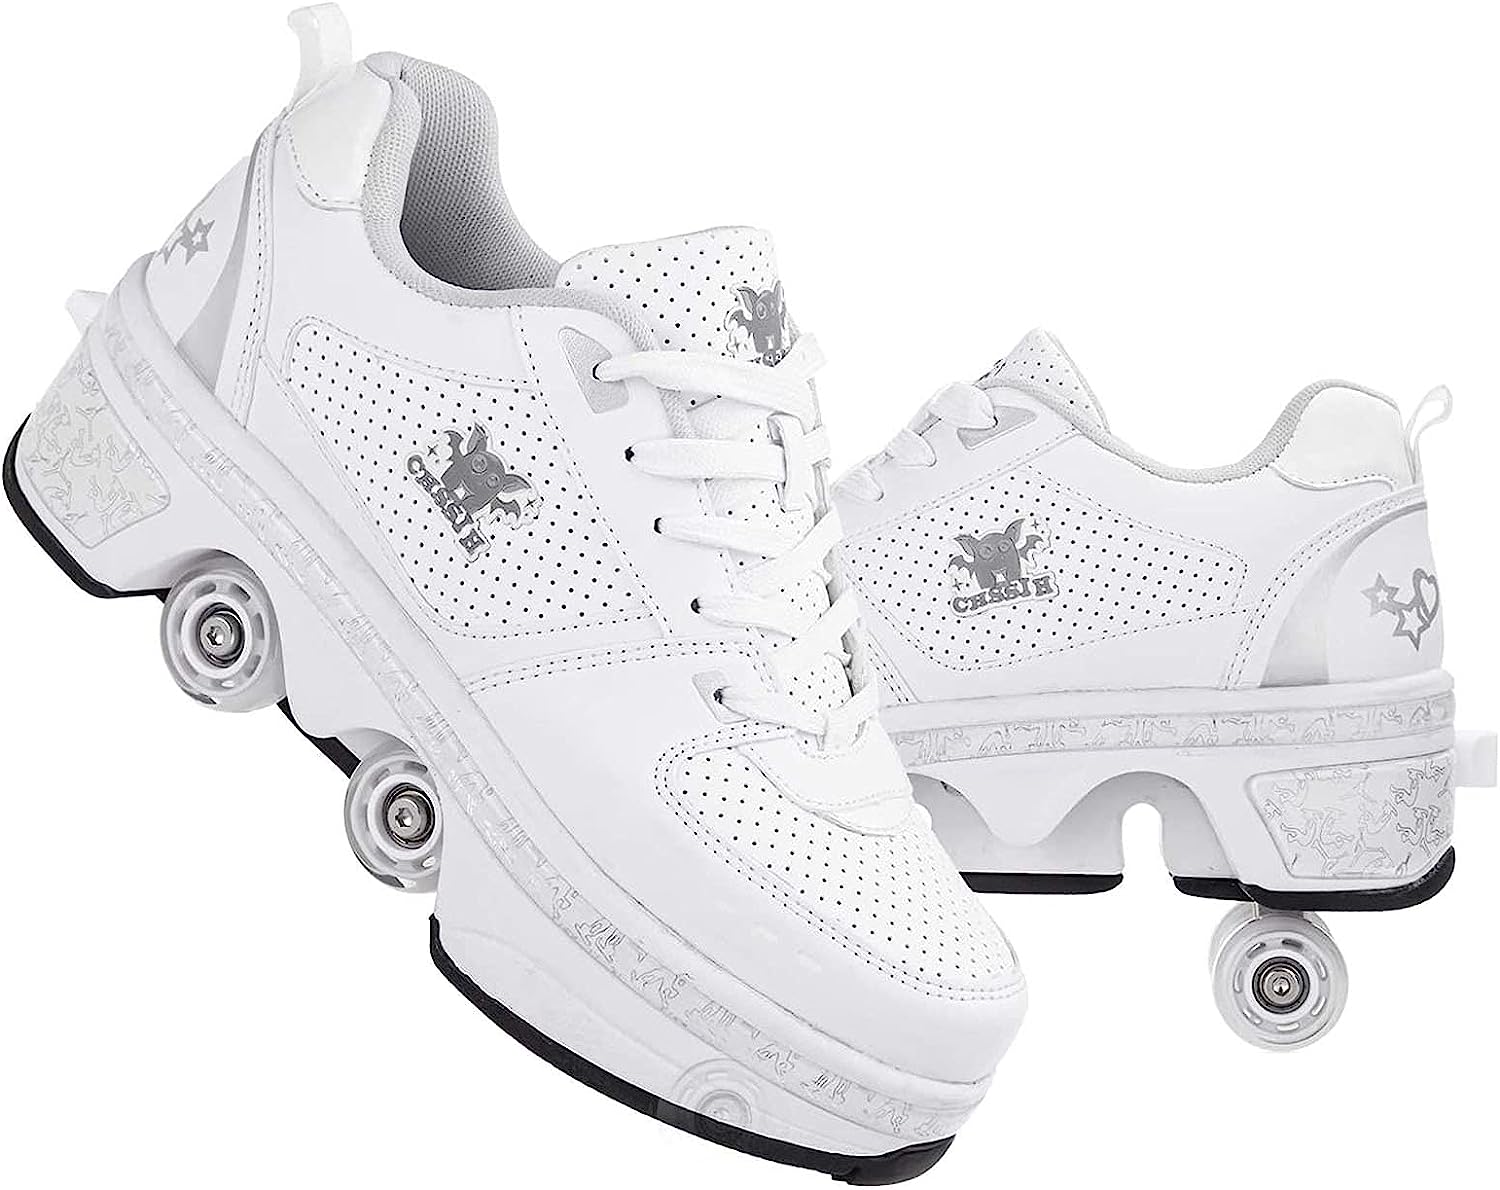 Roller Skates for Women Outdoor,Parkour Shoes with [...]